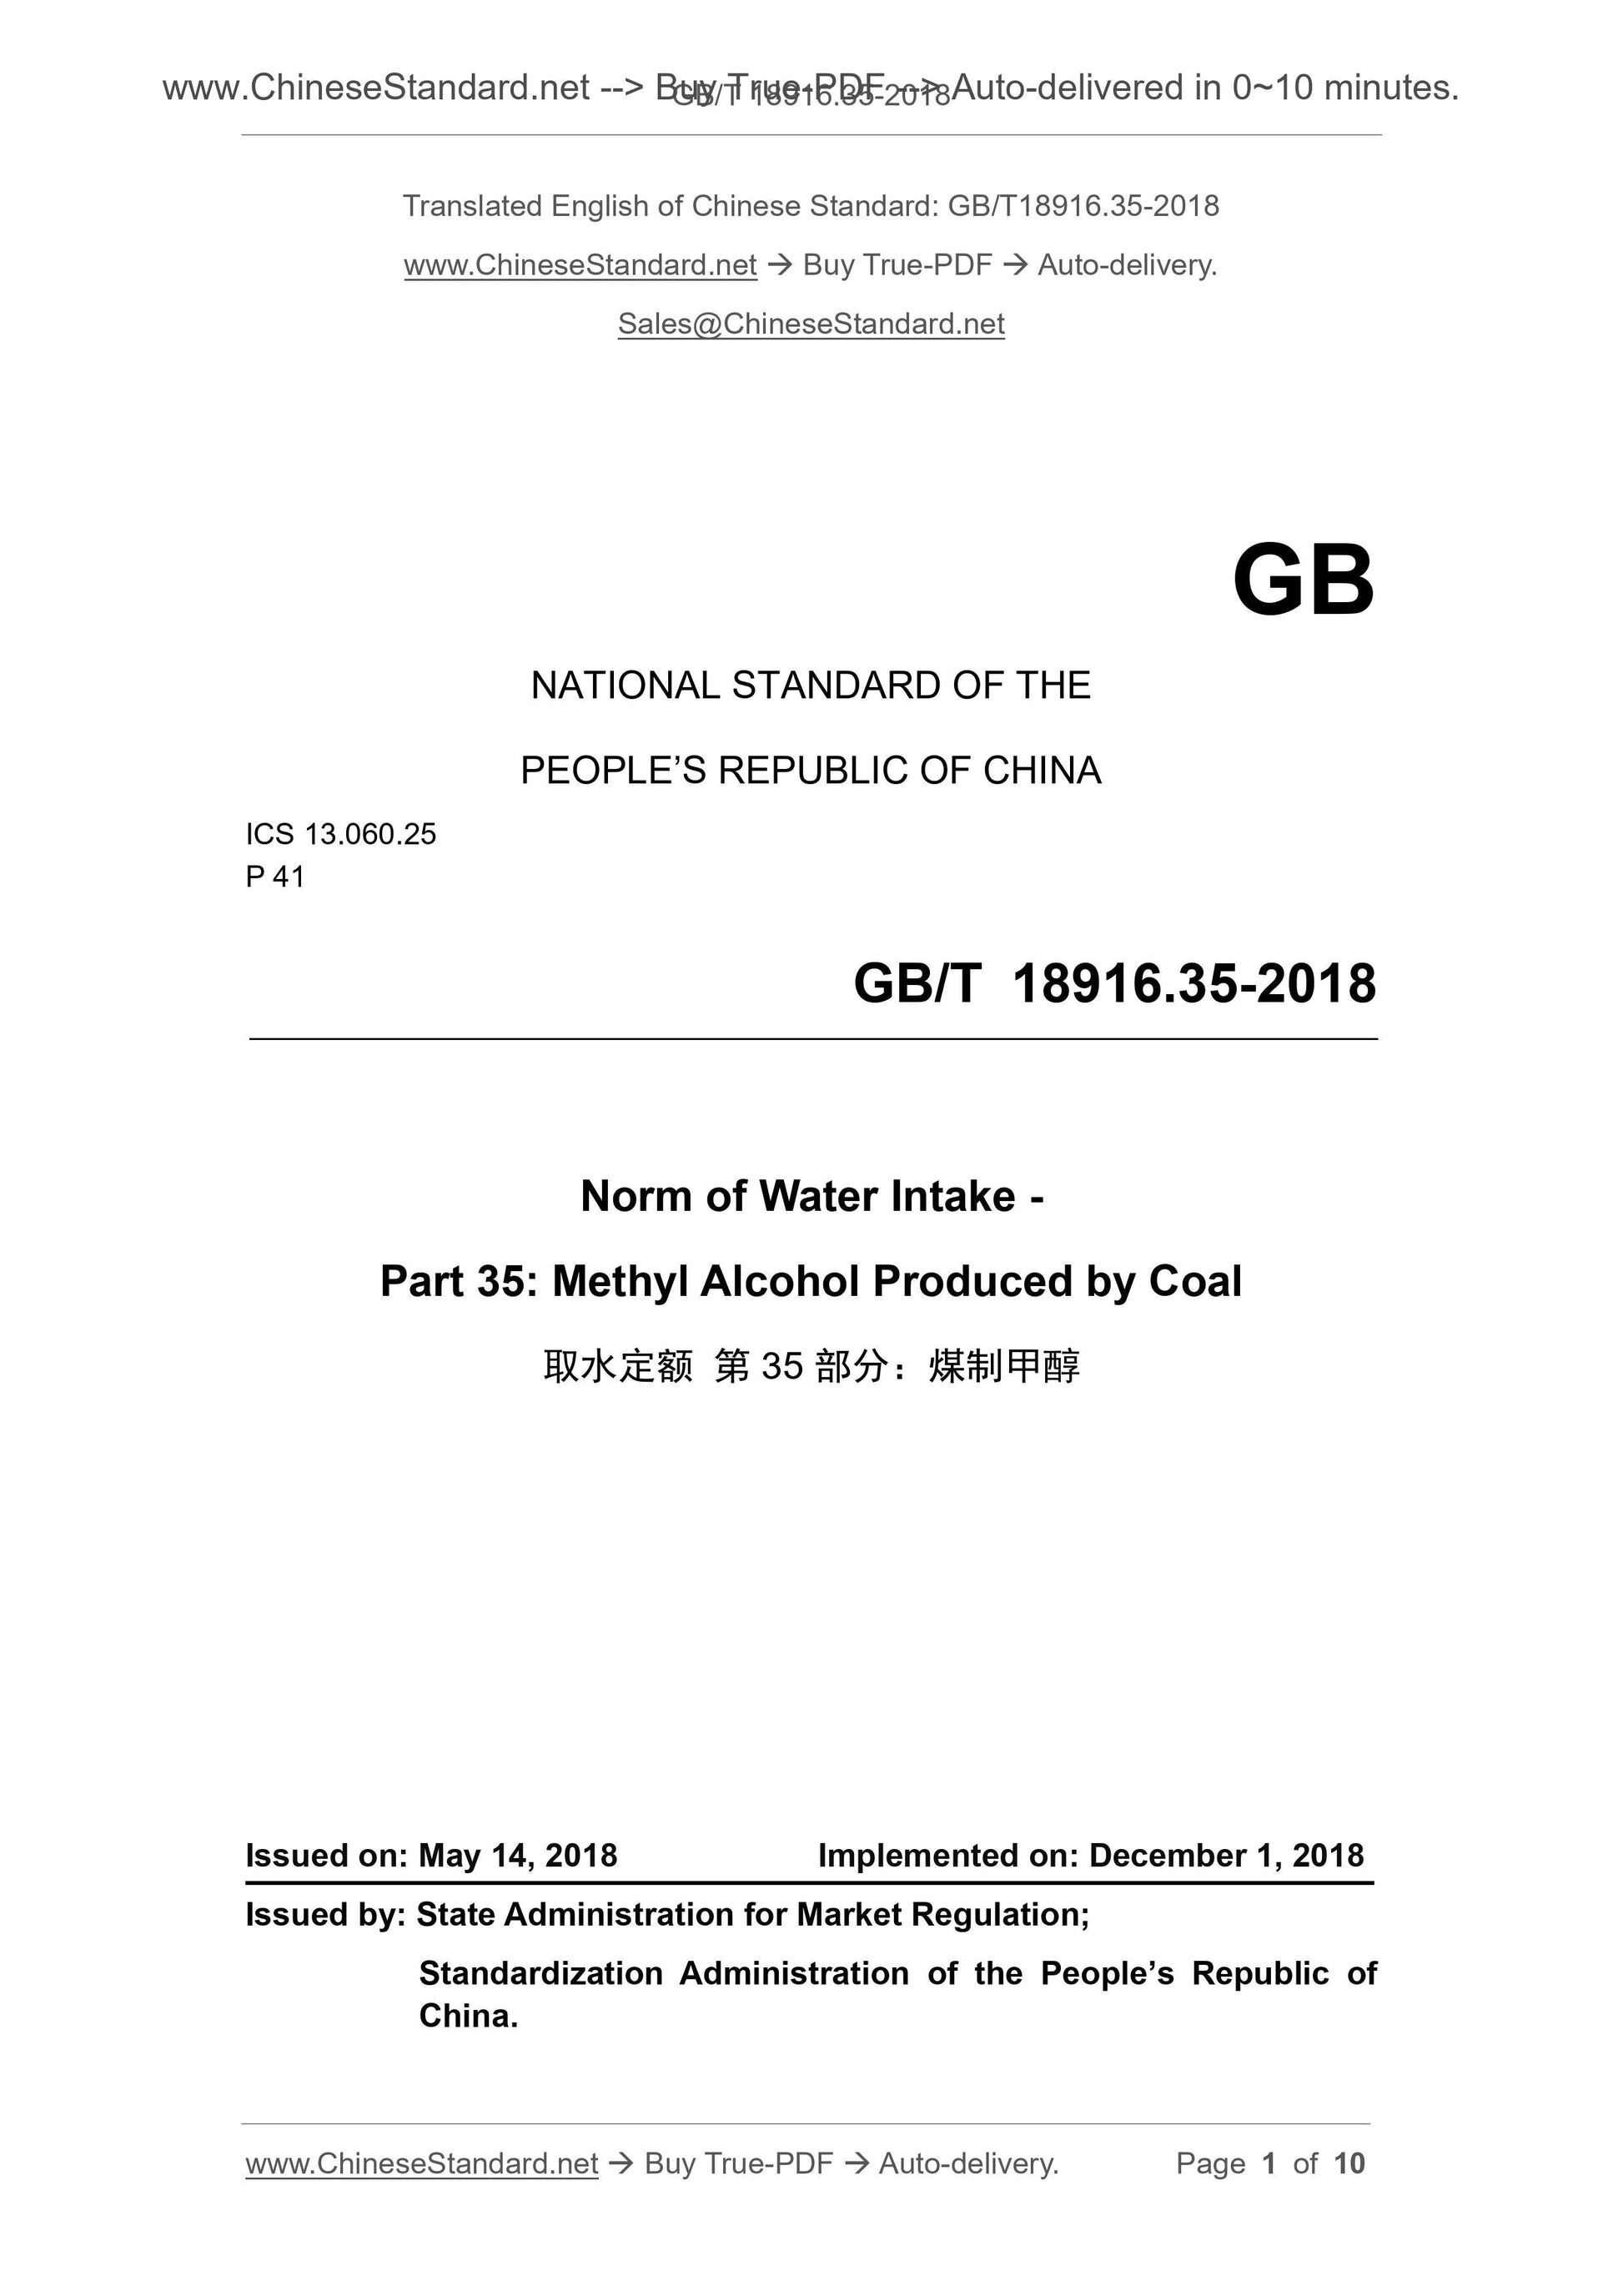 GB/T 18916.35-2018 Page 1